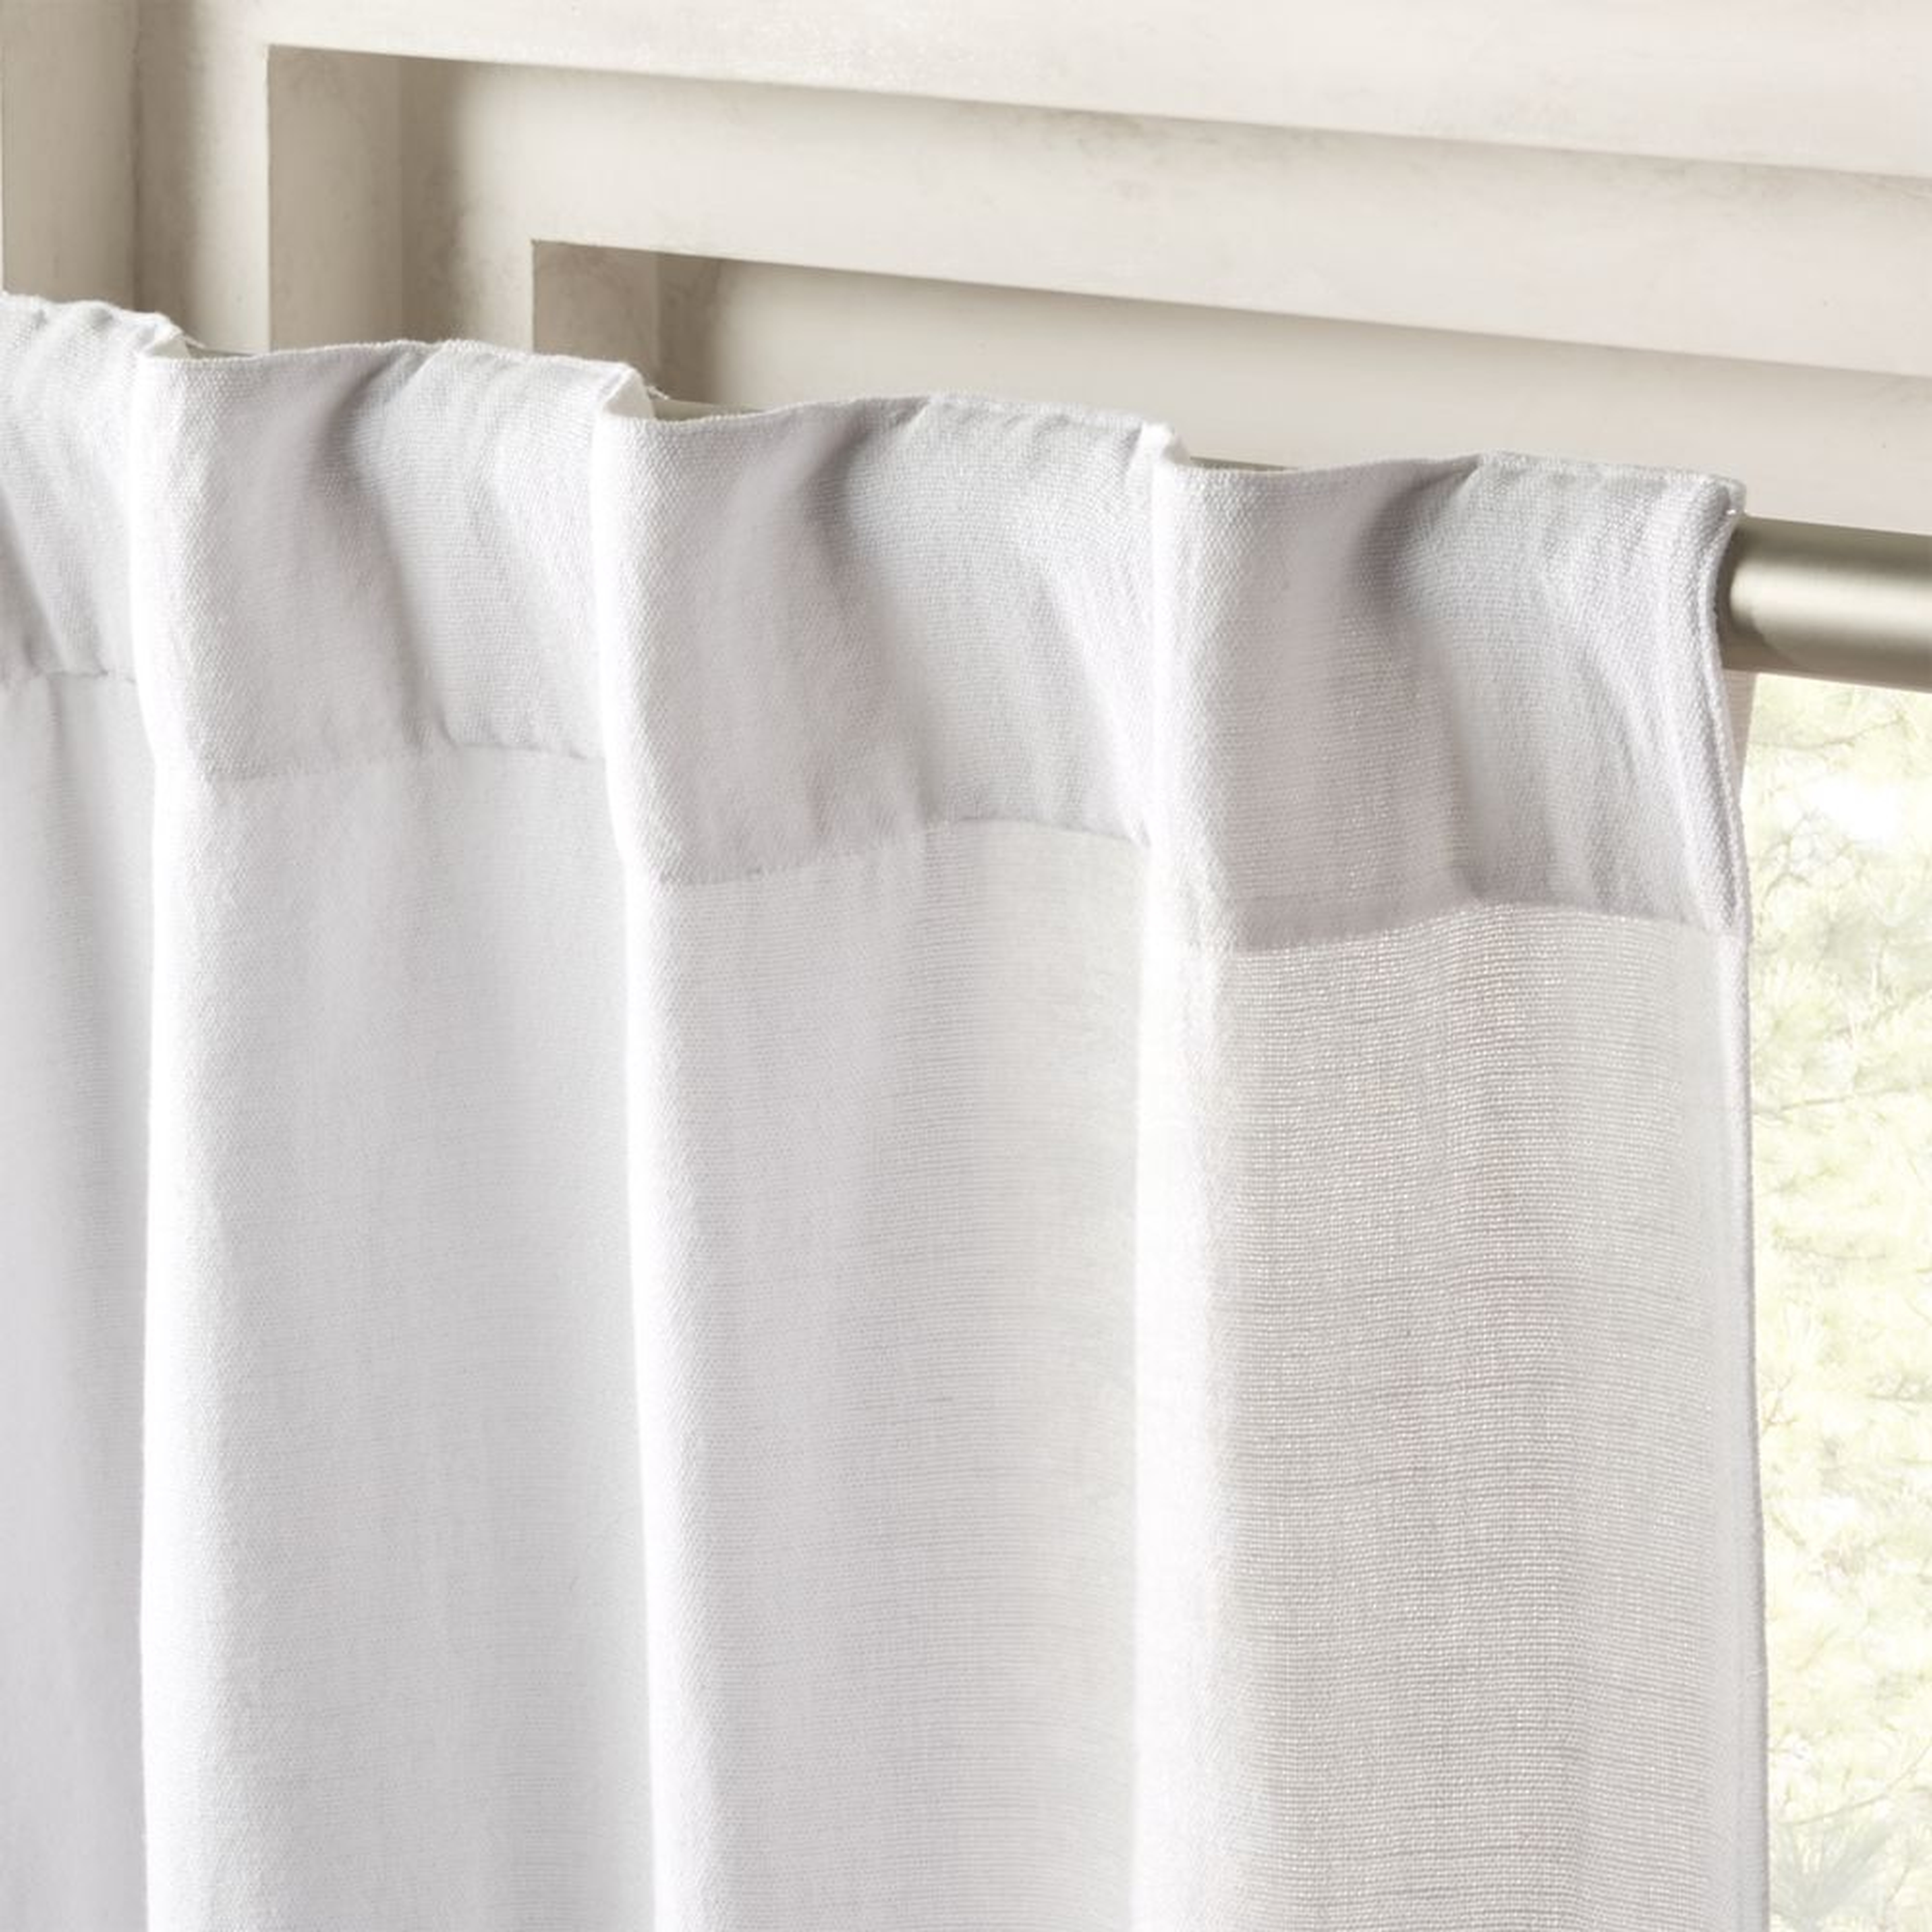 Weekendr White Chambray Curtain Panel 48"x108" - CB2